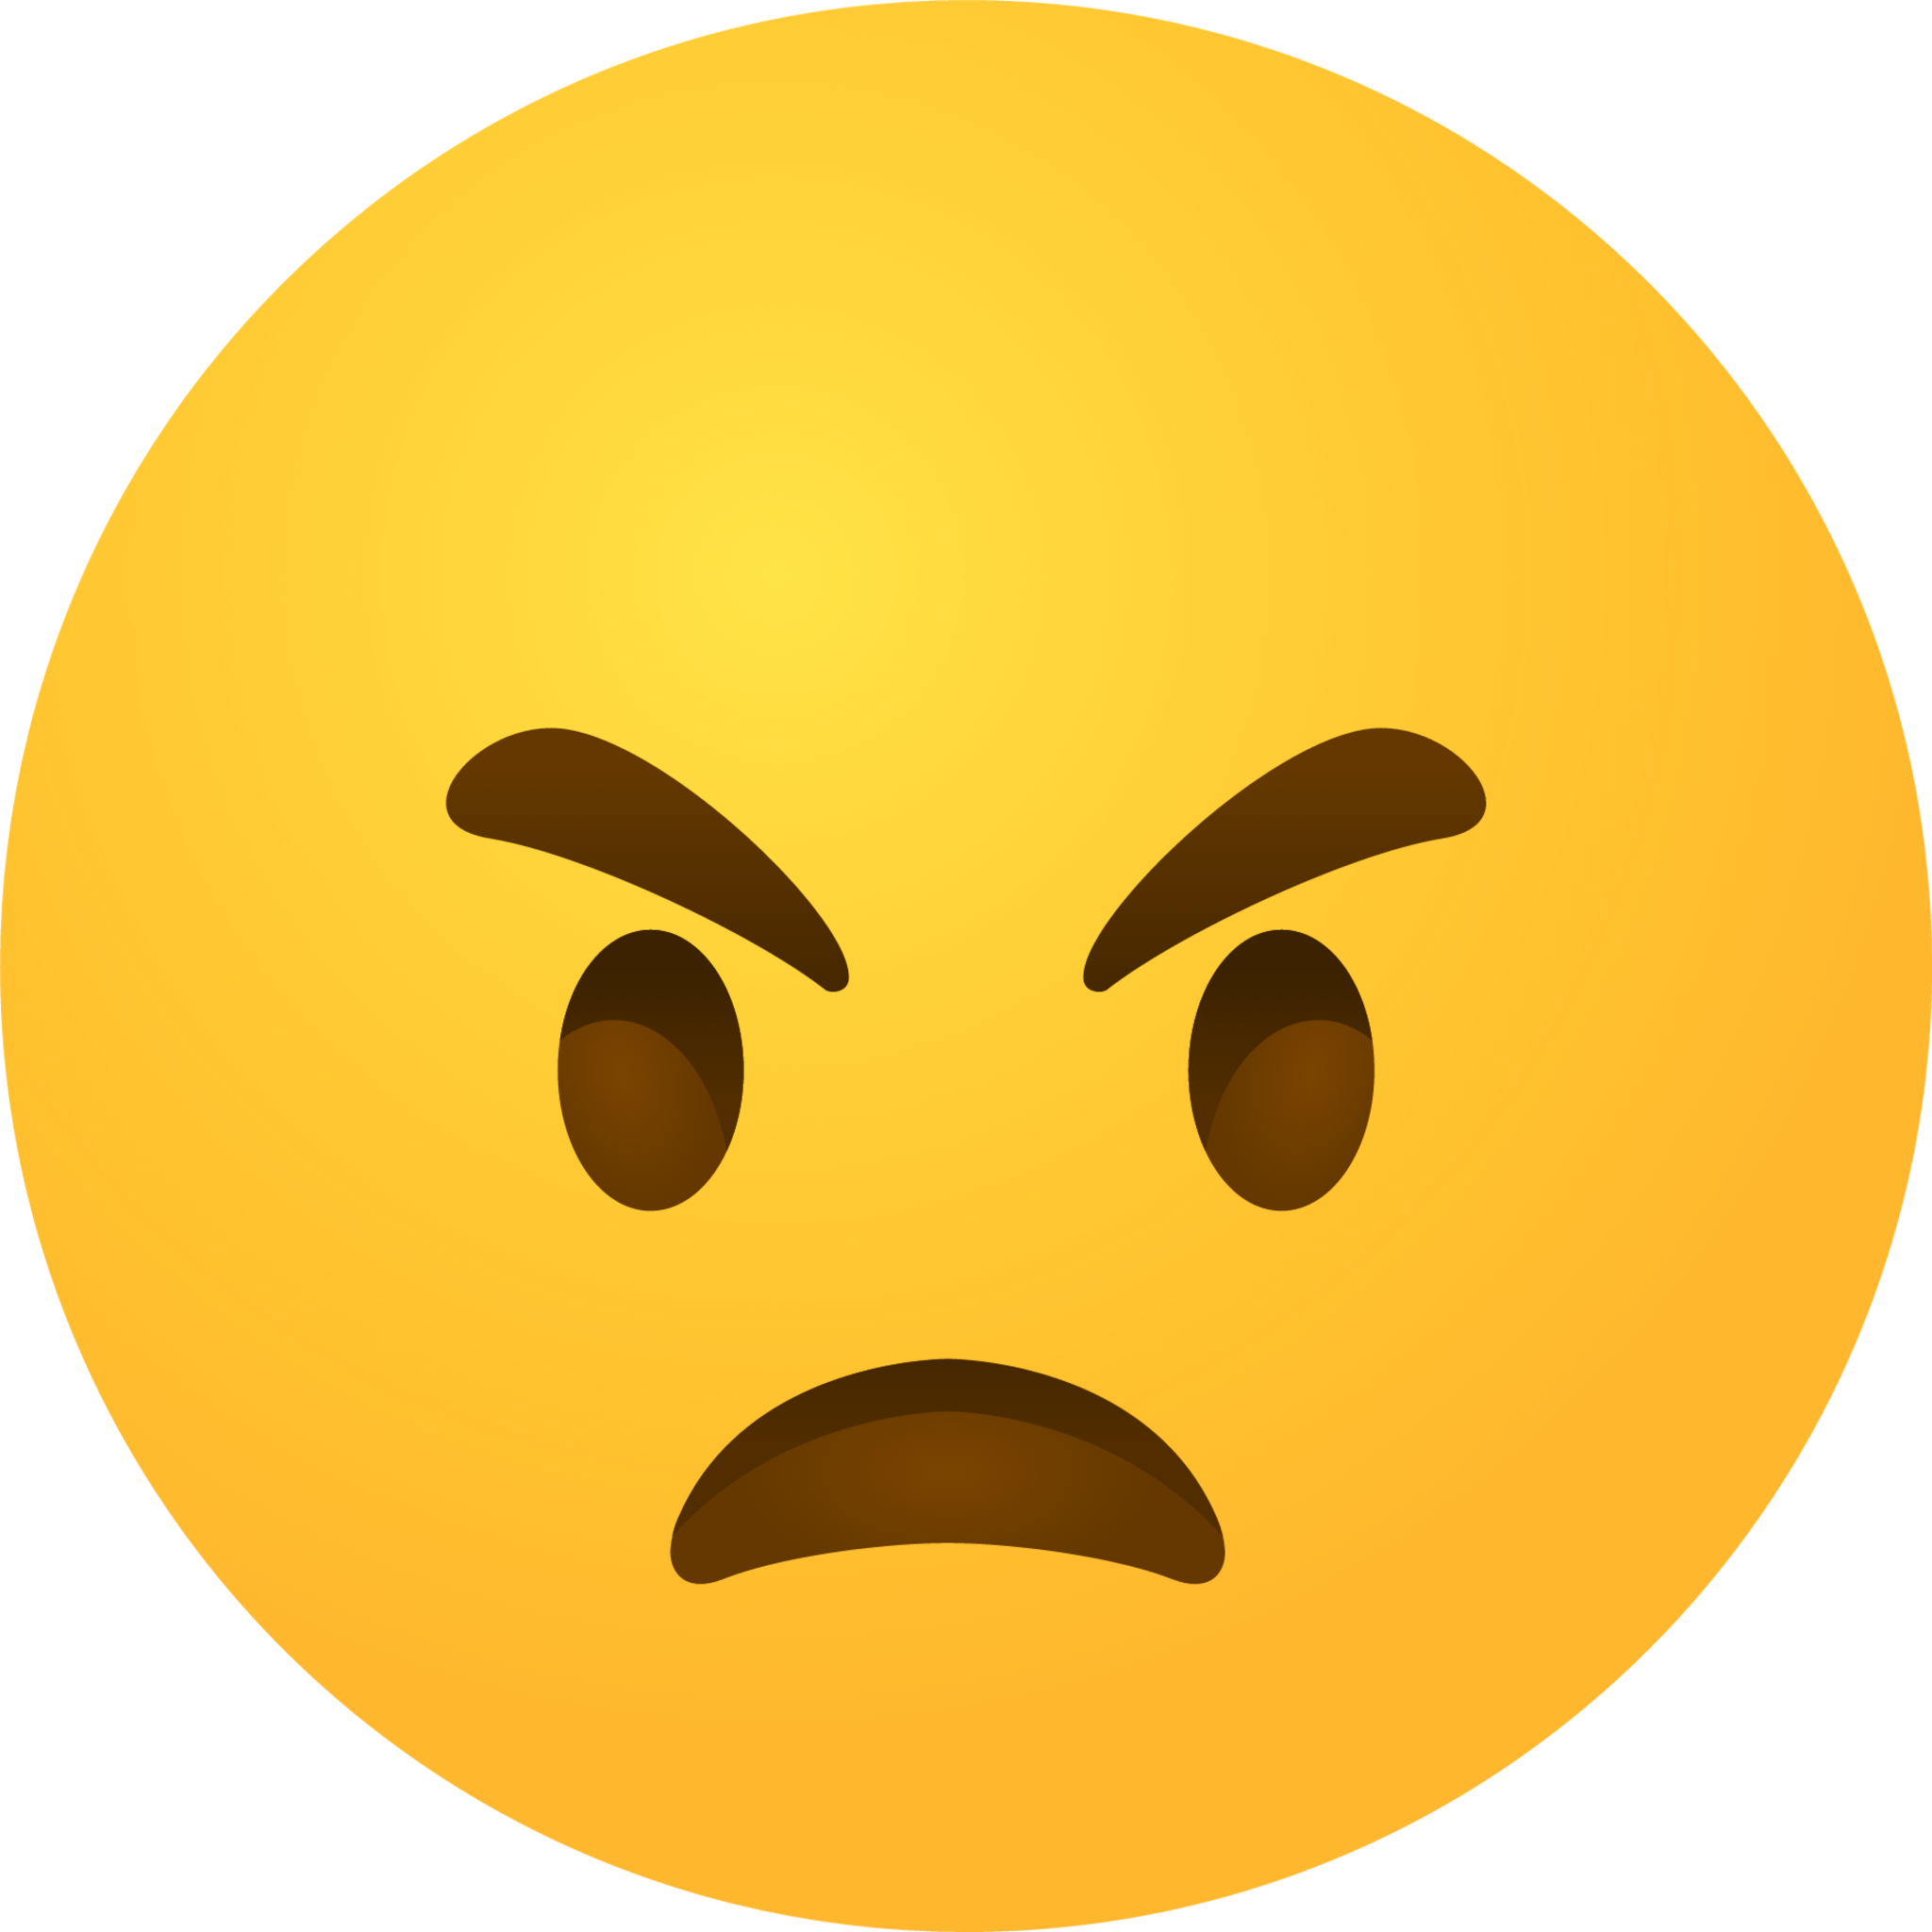 Angry Face - Angry face emoji with red smiley mouth - CleanPNG ...